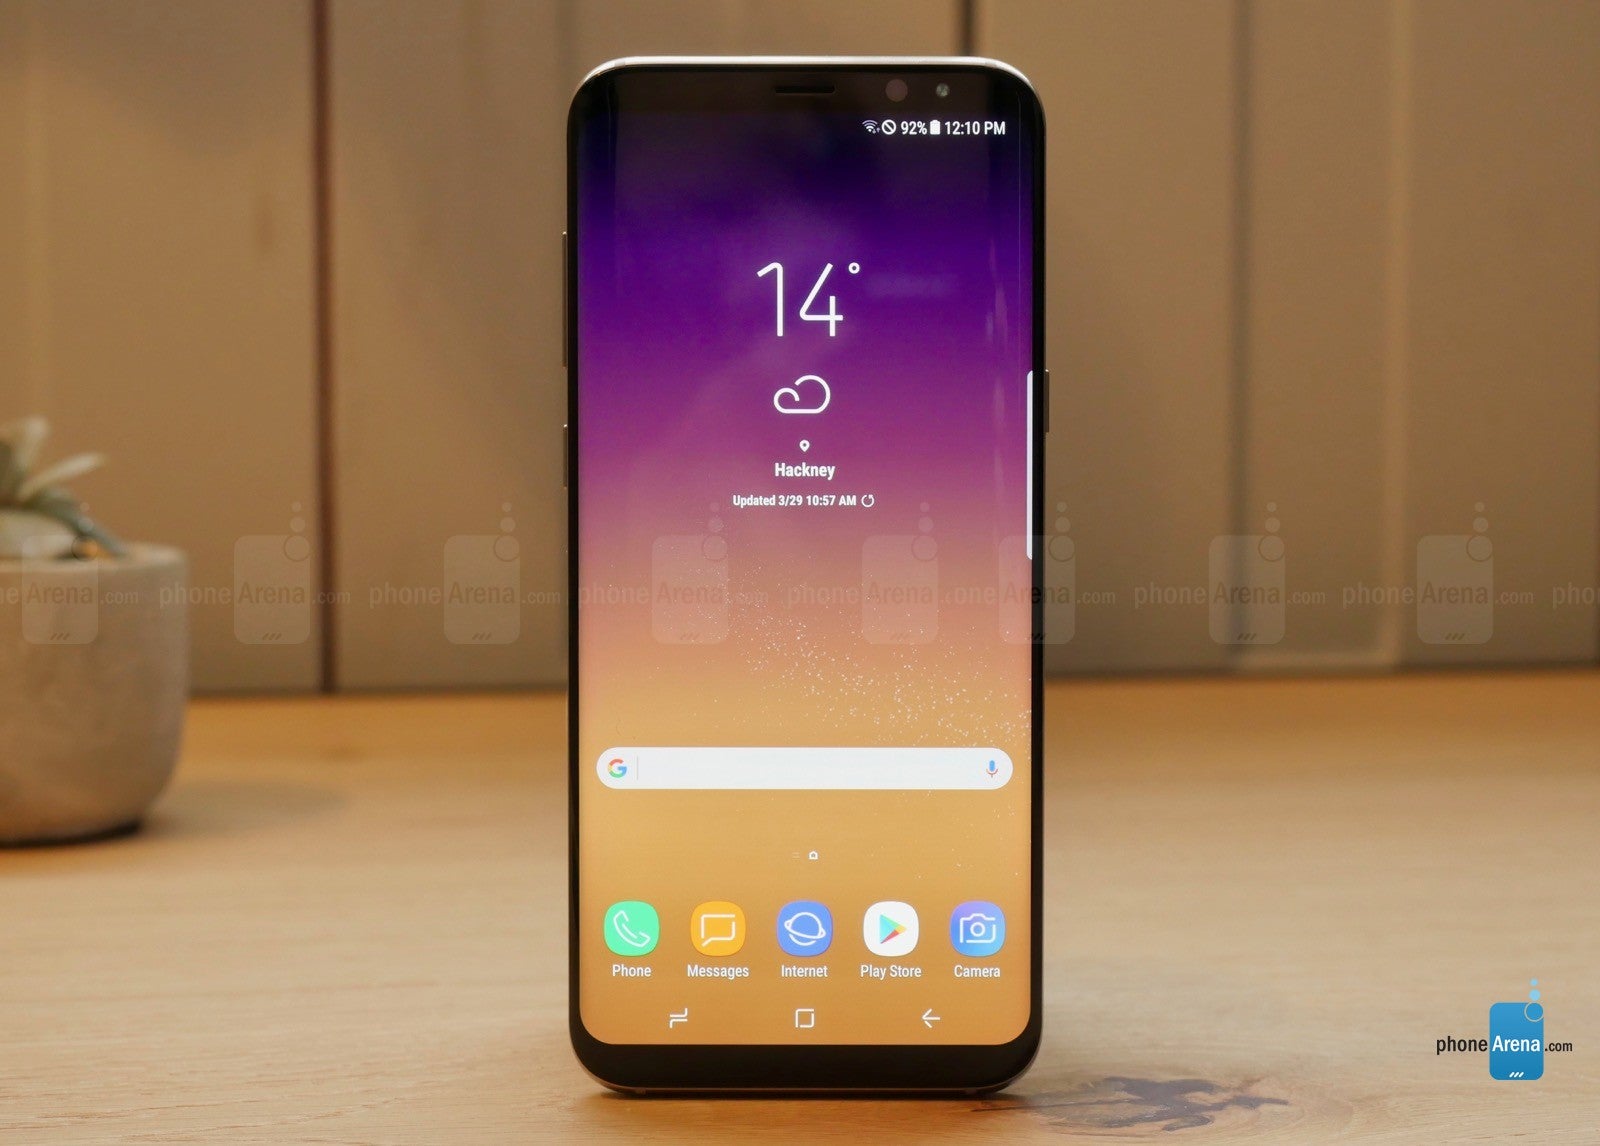 The Galaxy S8 set a trend. Now, the rest must follow. - Top 5 smartphones with curved screens and edgeless displays coming in 2017